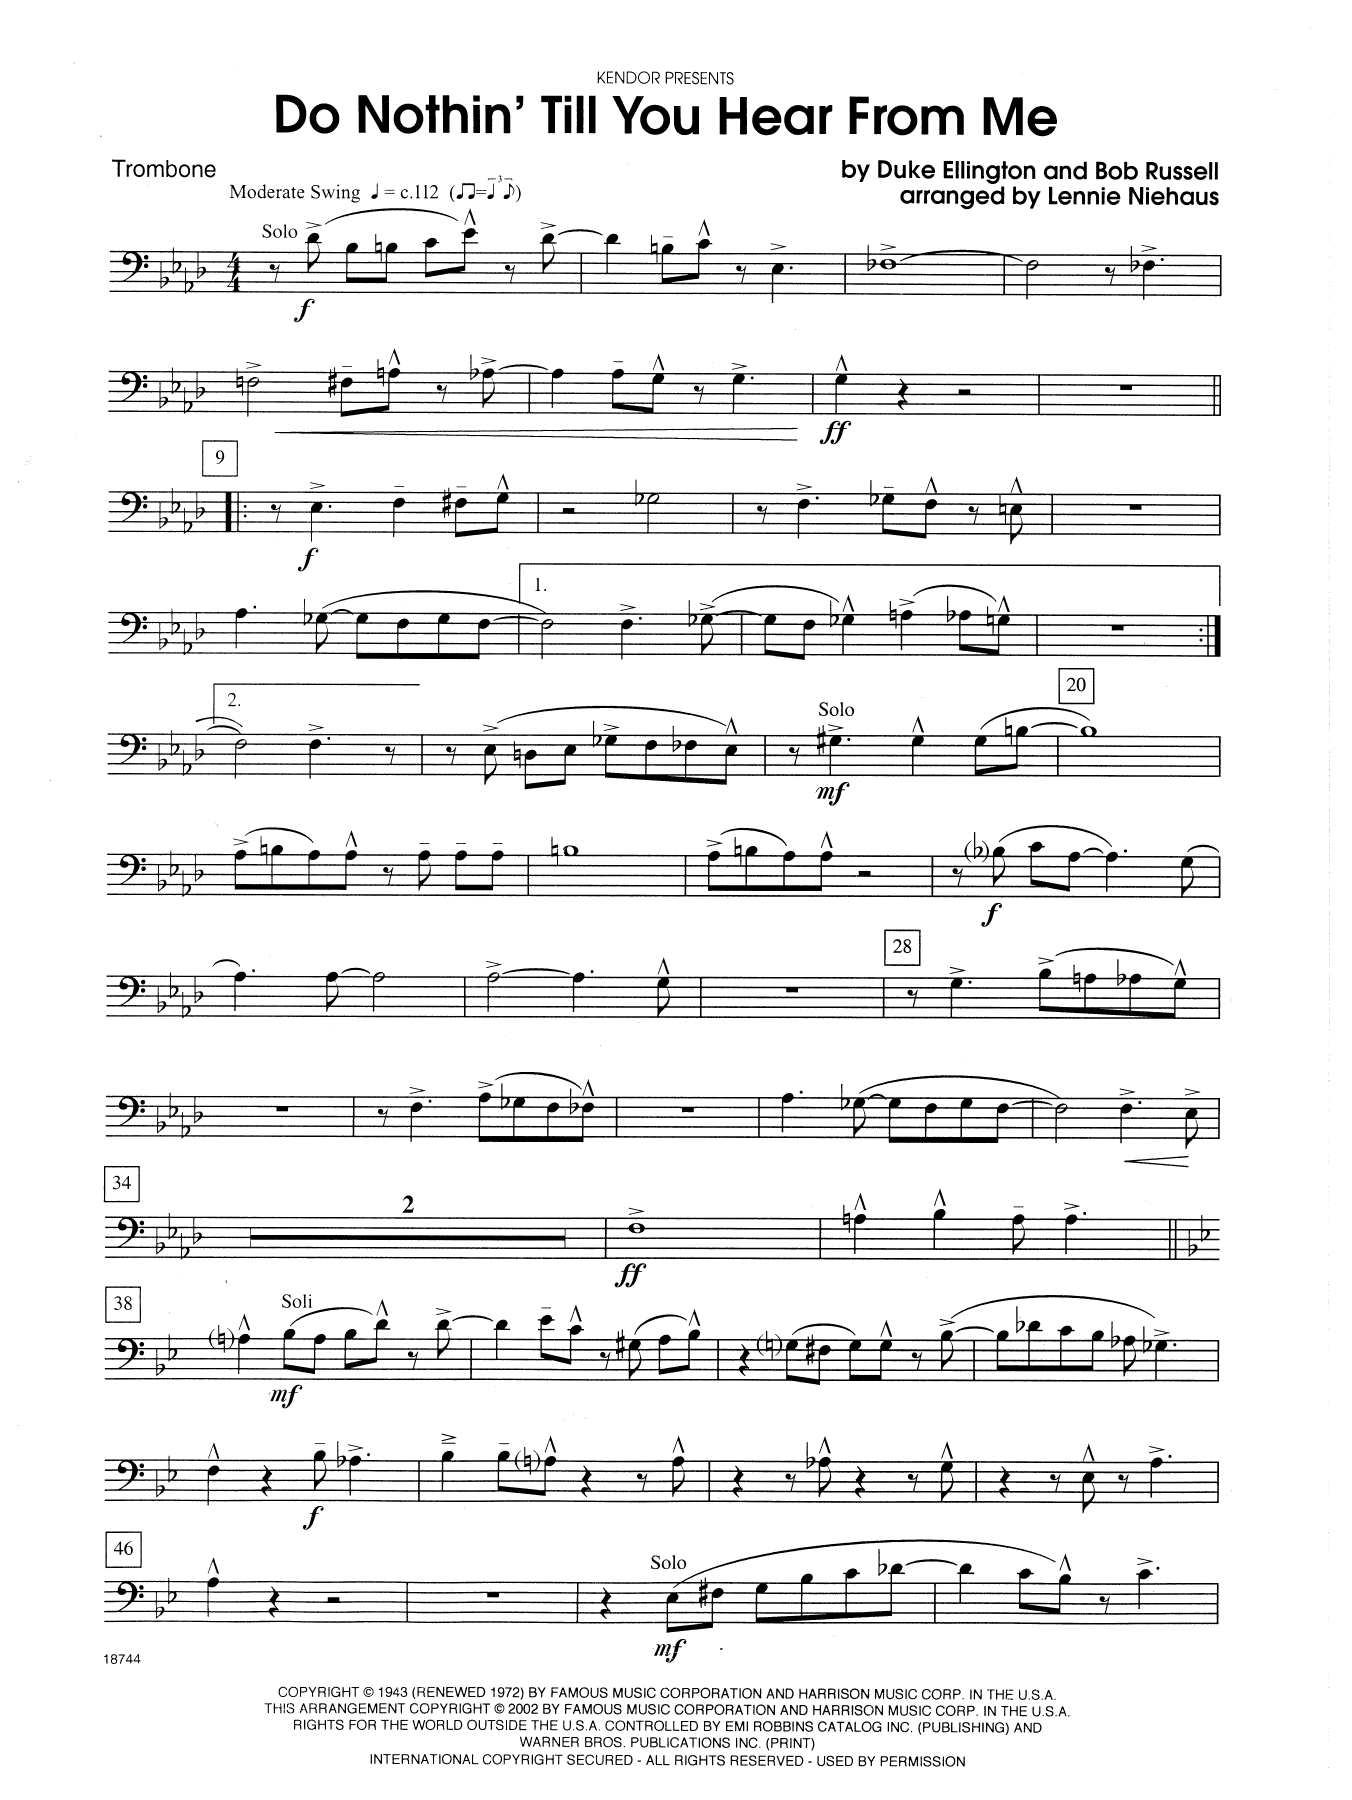 Download Lennie Niehaus Do Nothin' Till You Hear from Me - Trom Sheet Music